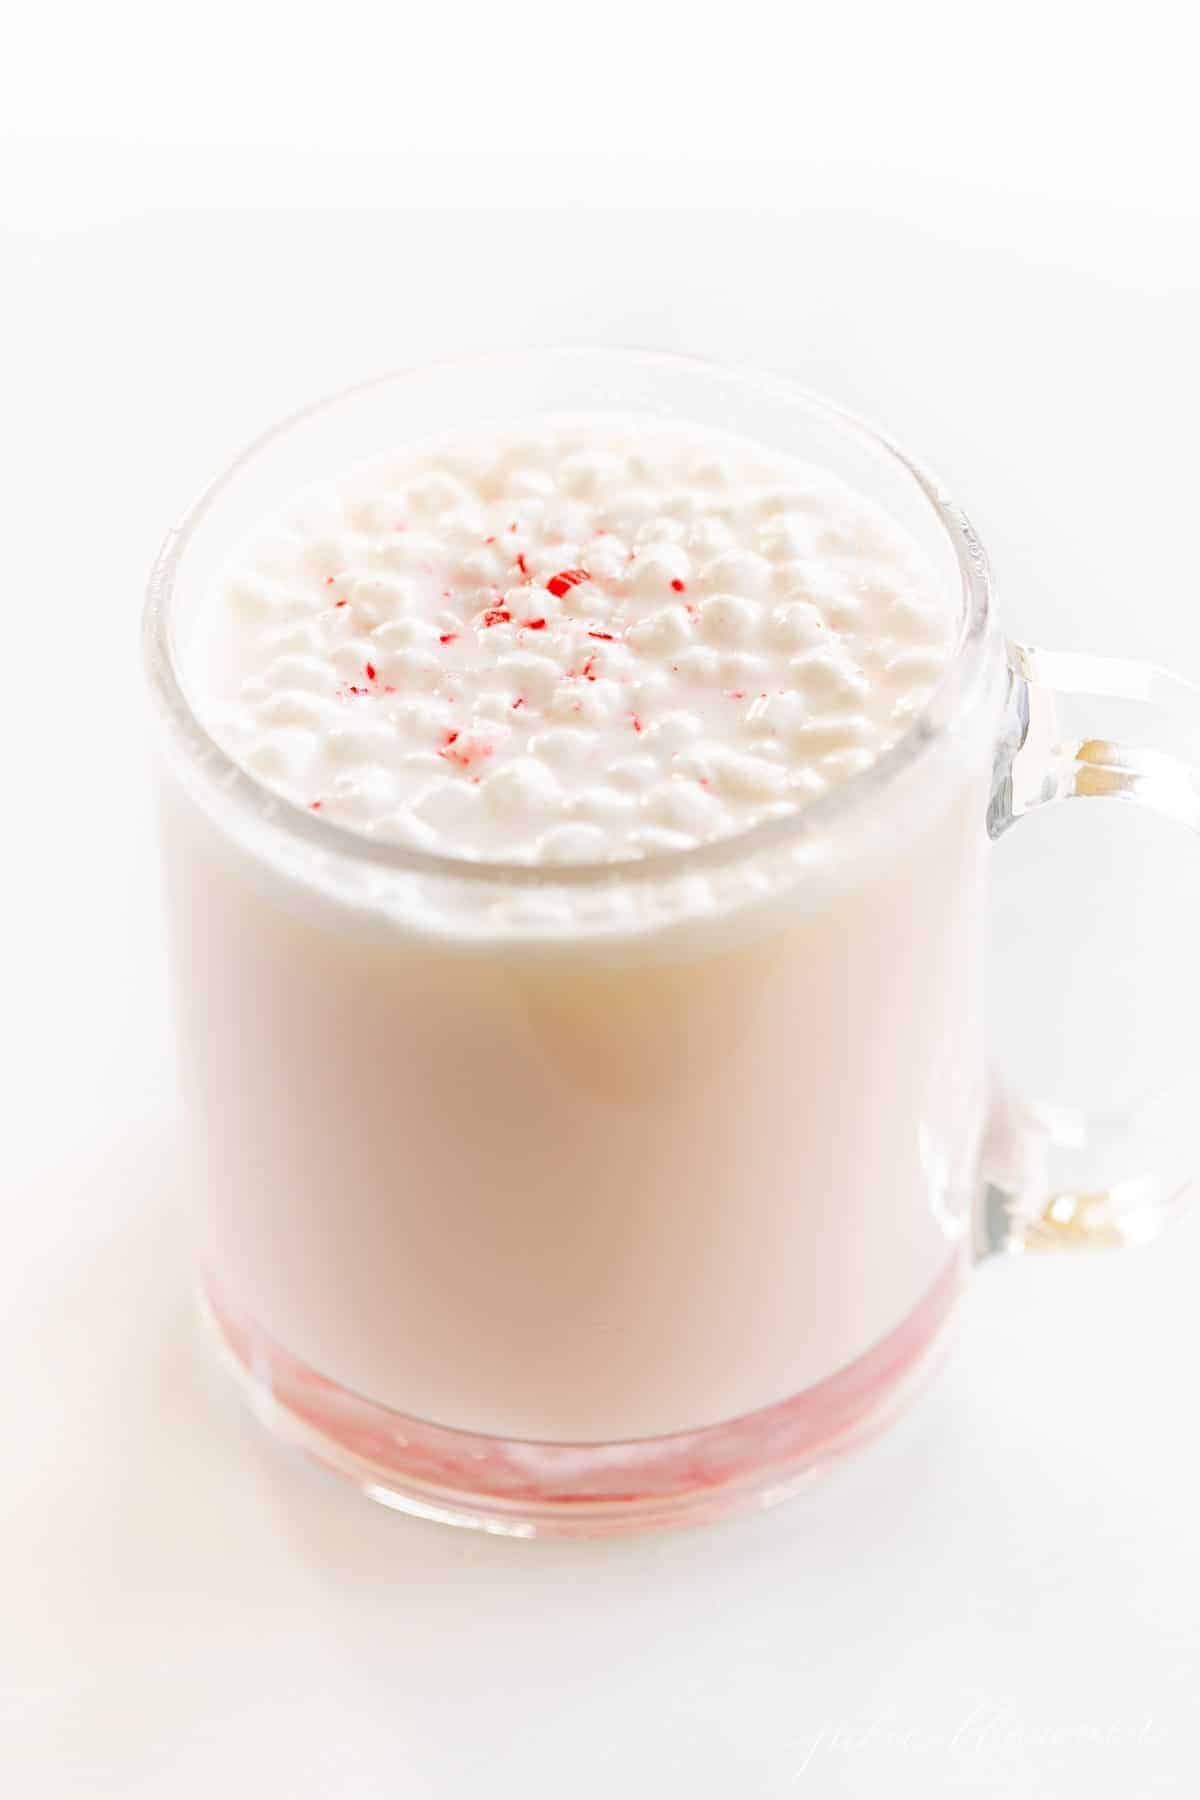 A clear glass mug of peppermint hot chocolate, topped with tiny marshmallows and crushed peppermint.